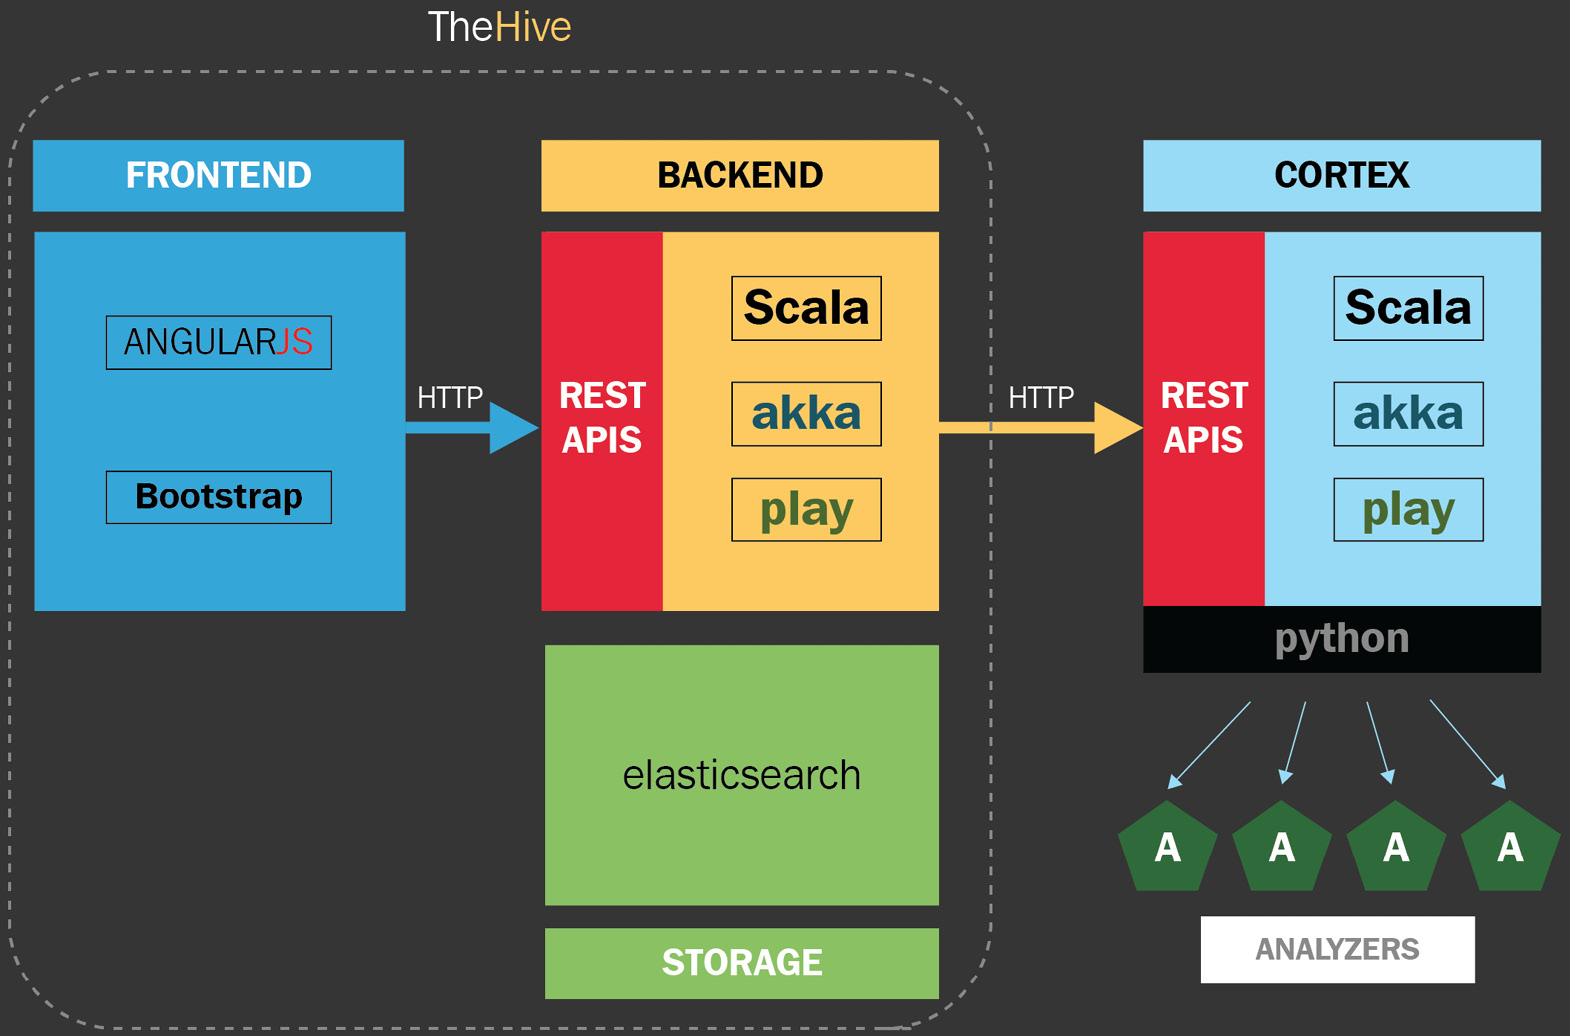 Figure 10.5 – TheHive architecture
